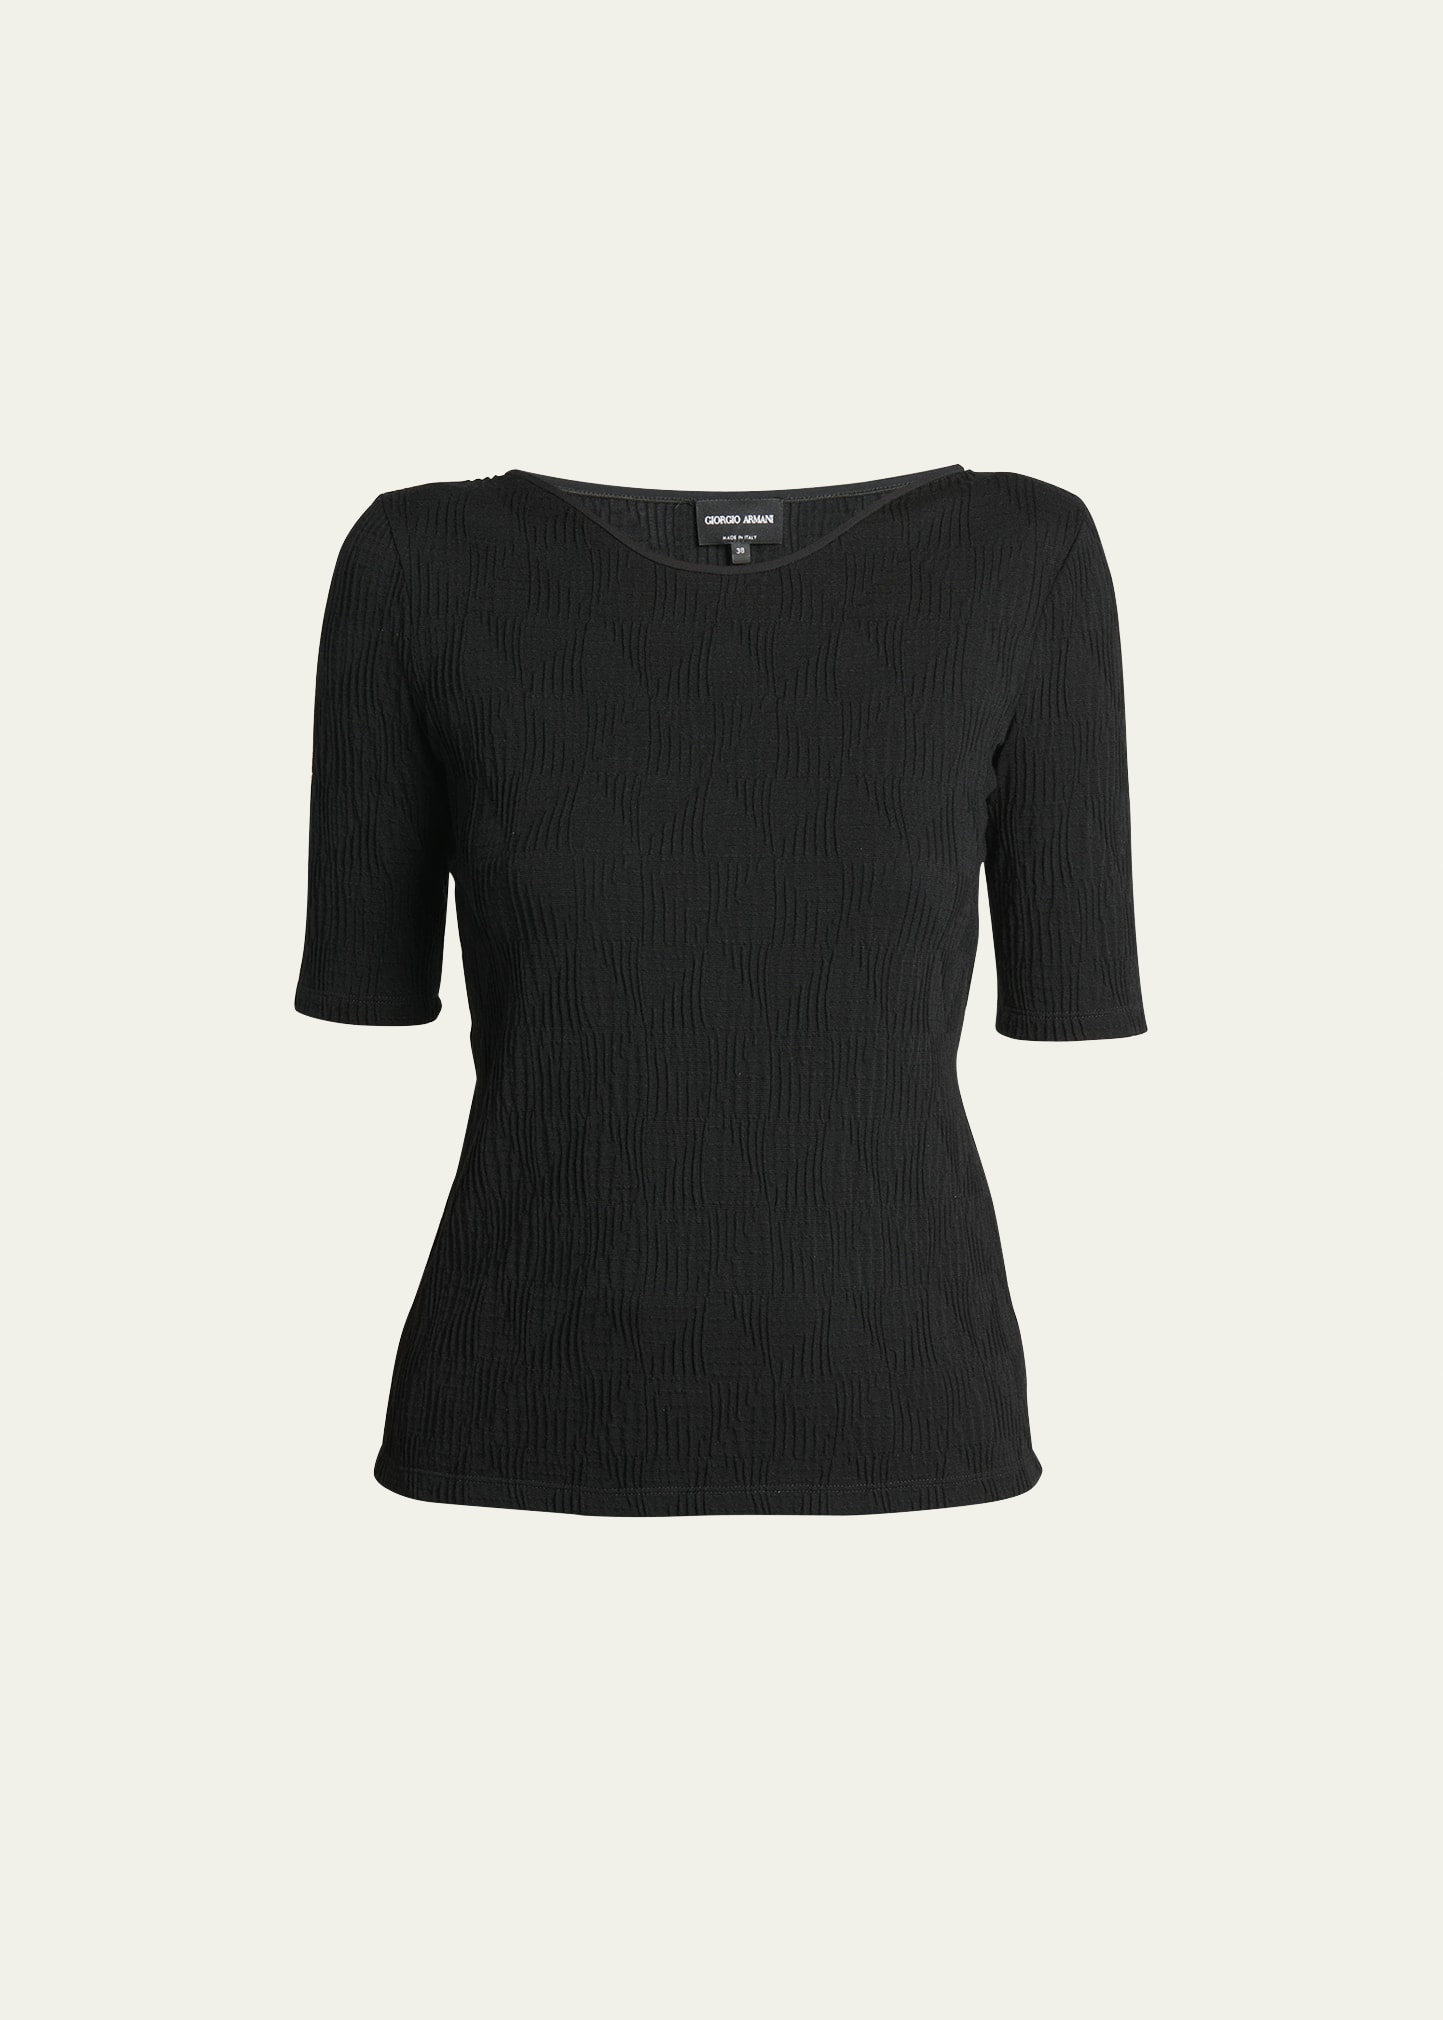 Giorgio Armani Official Store Links-stitch Viscose Short-sleeved Jumper In Navy Blue